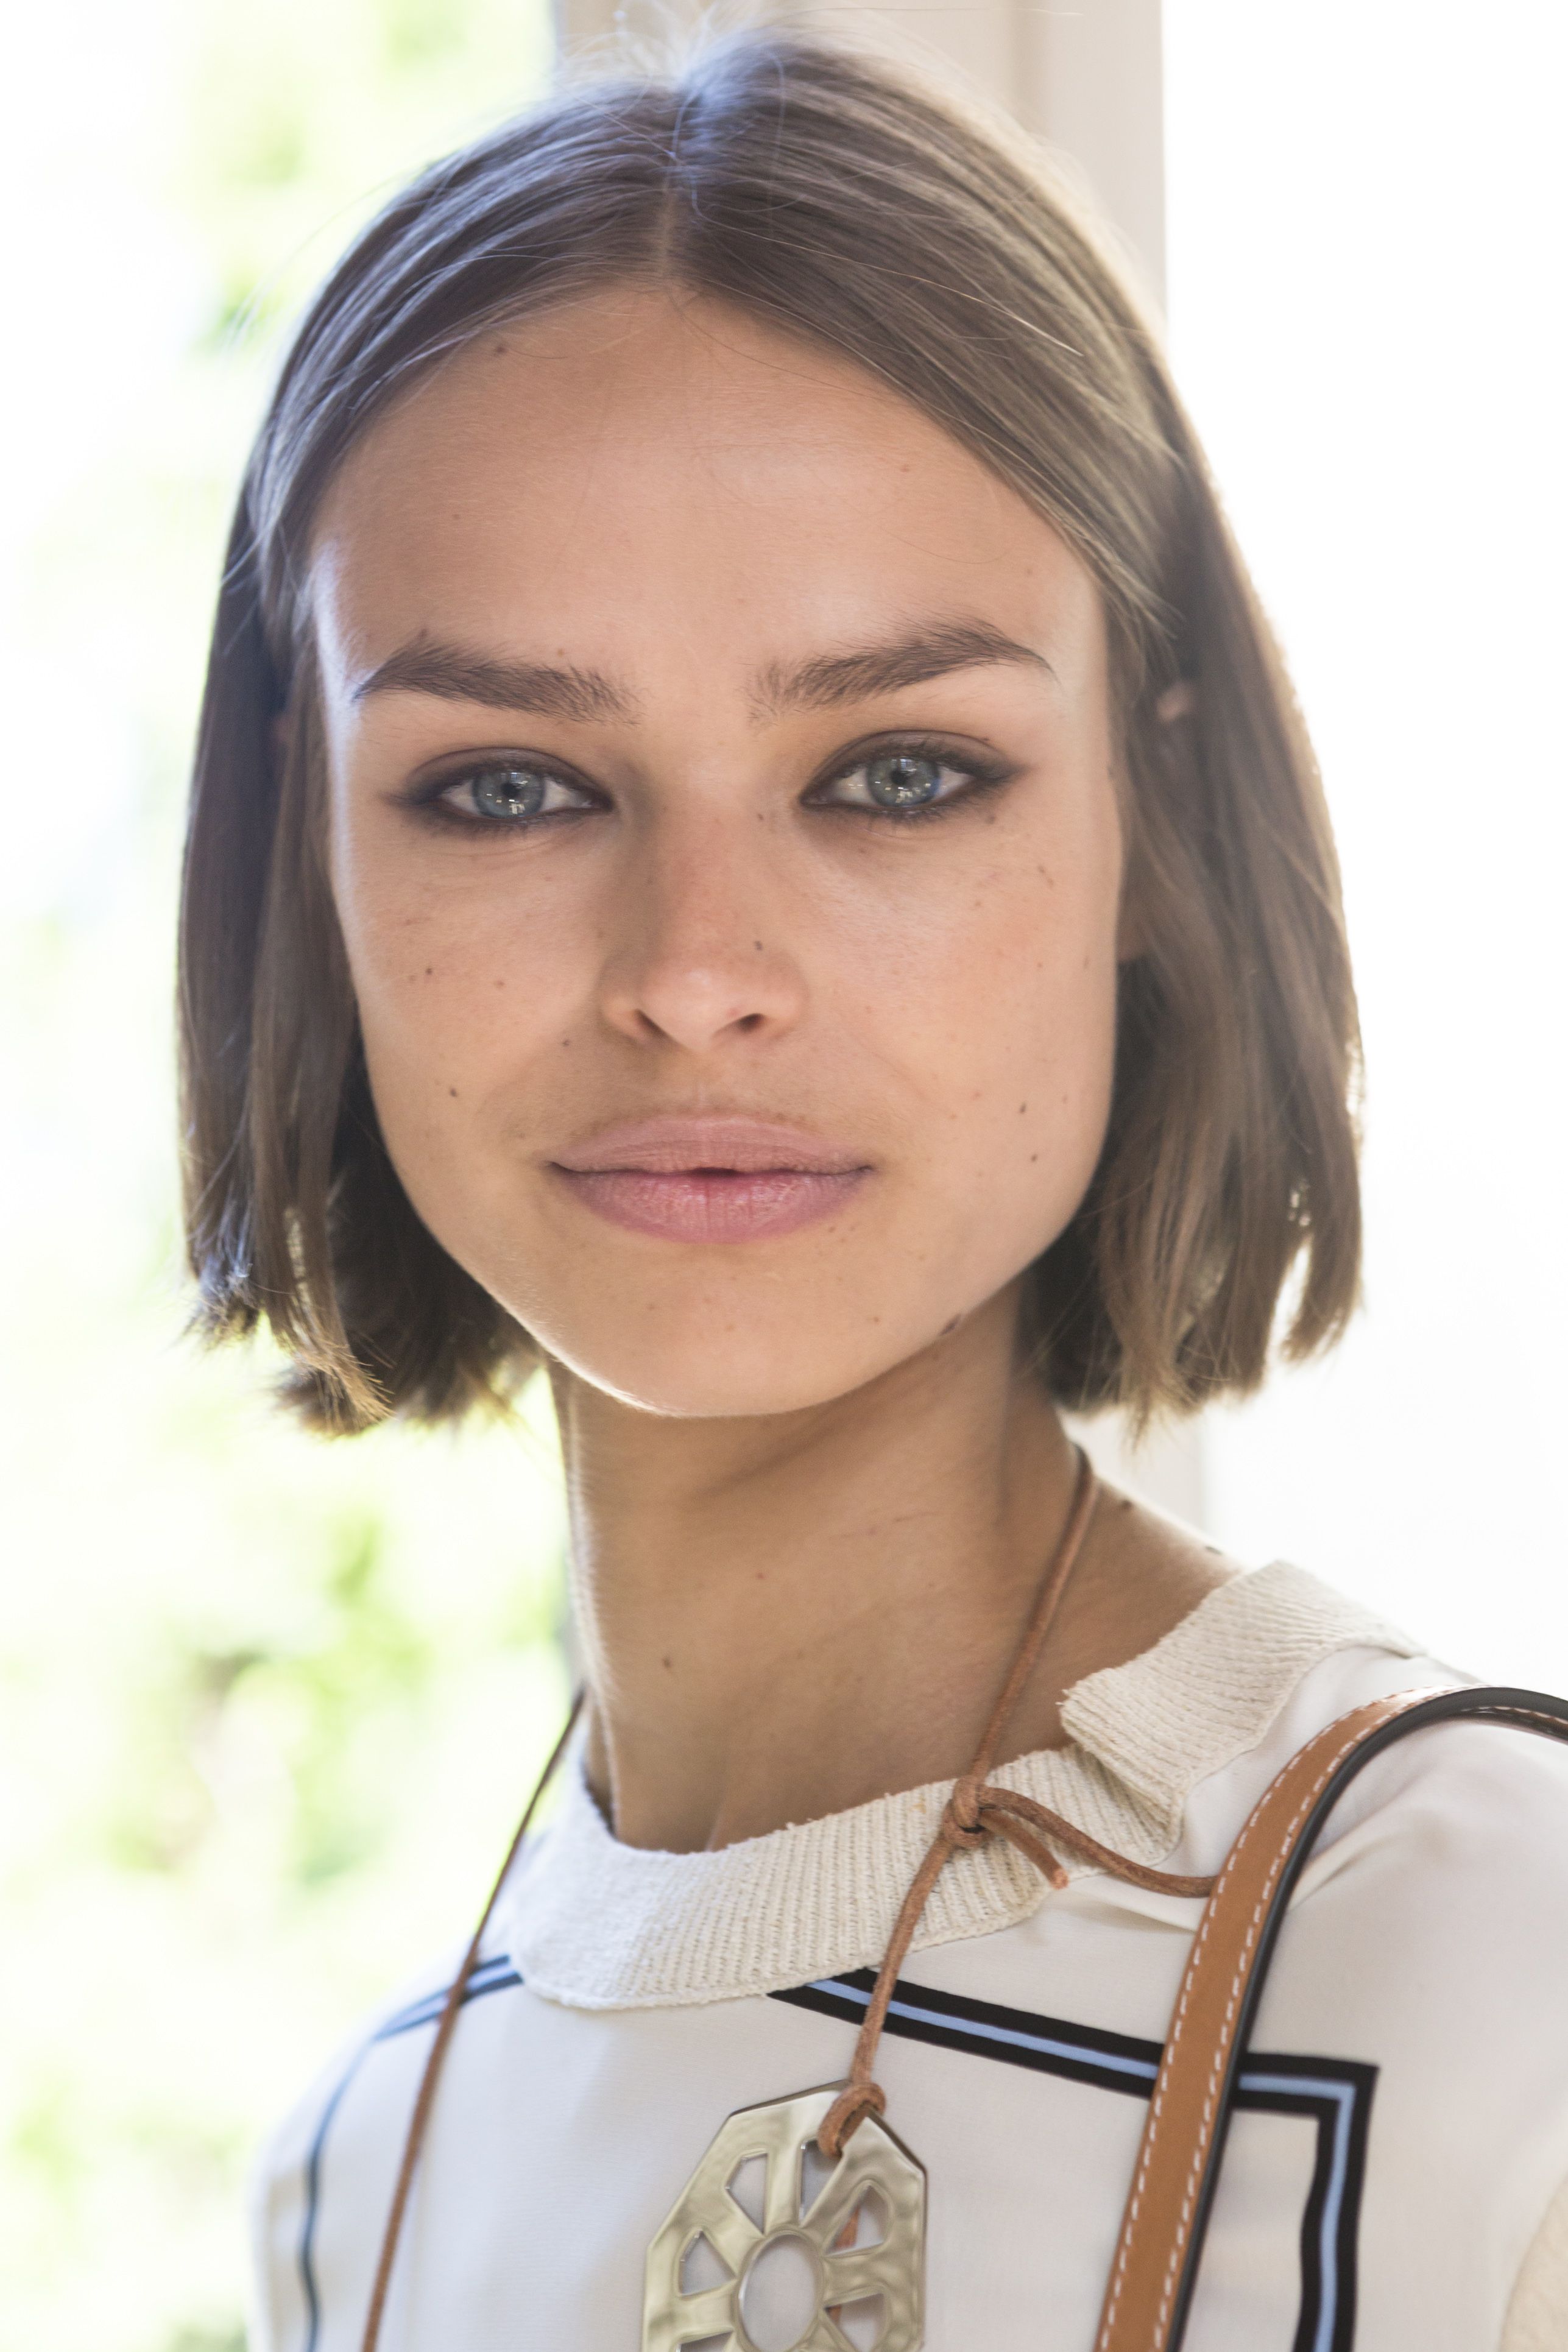 spring 2018 hair trends - hair ideas and hairstyles for spring 2018